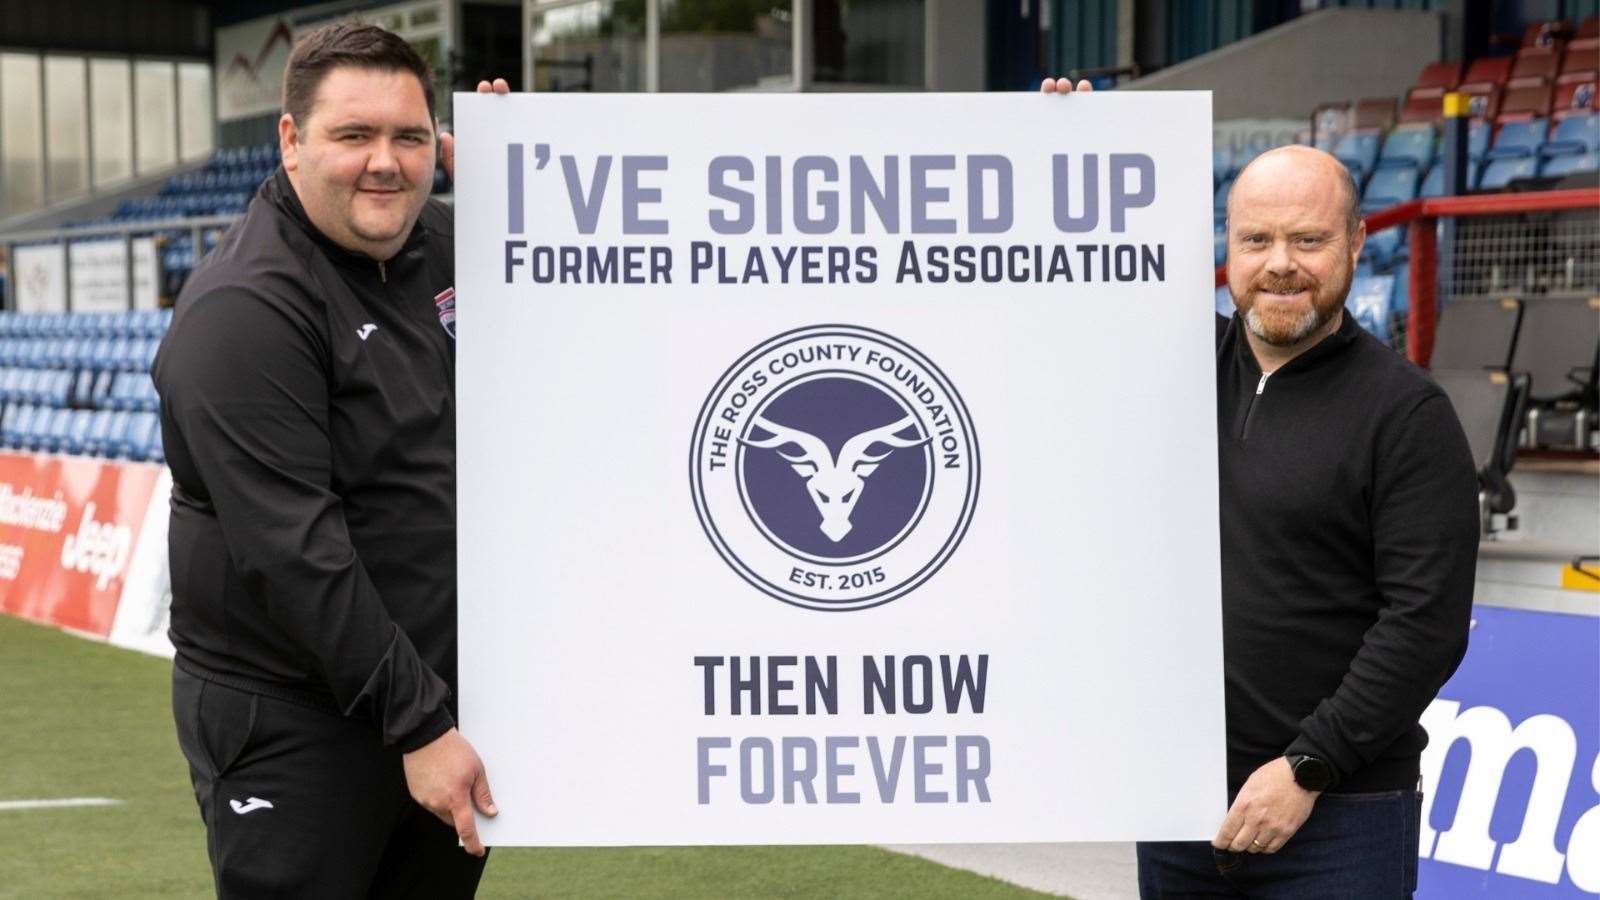 The Ross County Foundation have launched a Former Players Association to bring together former players and managers.